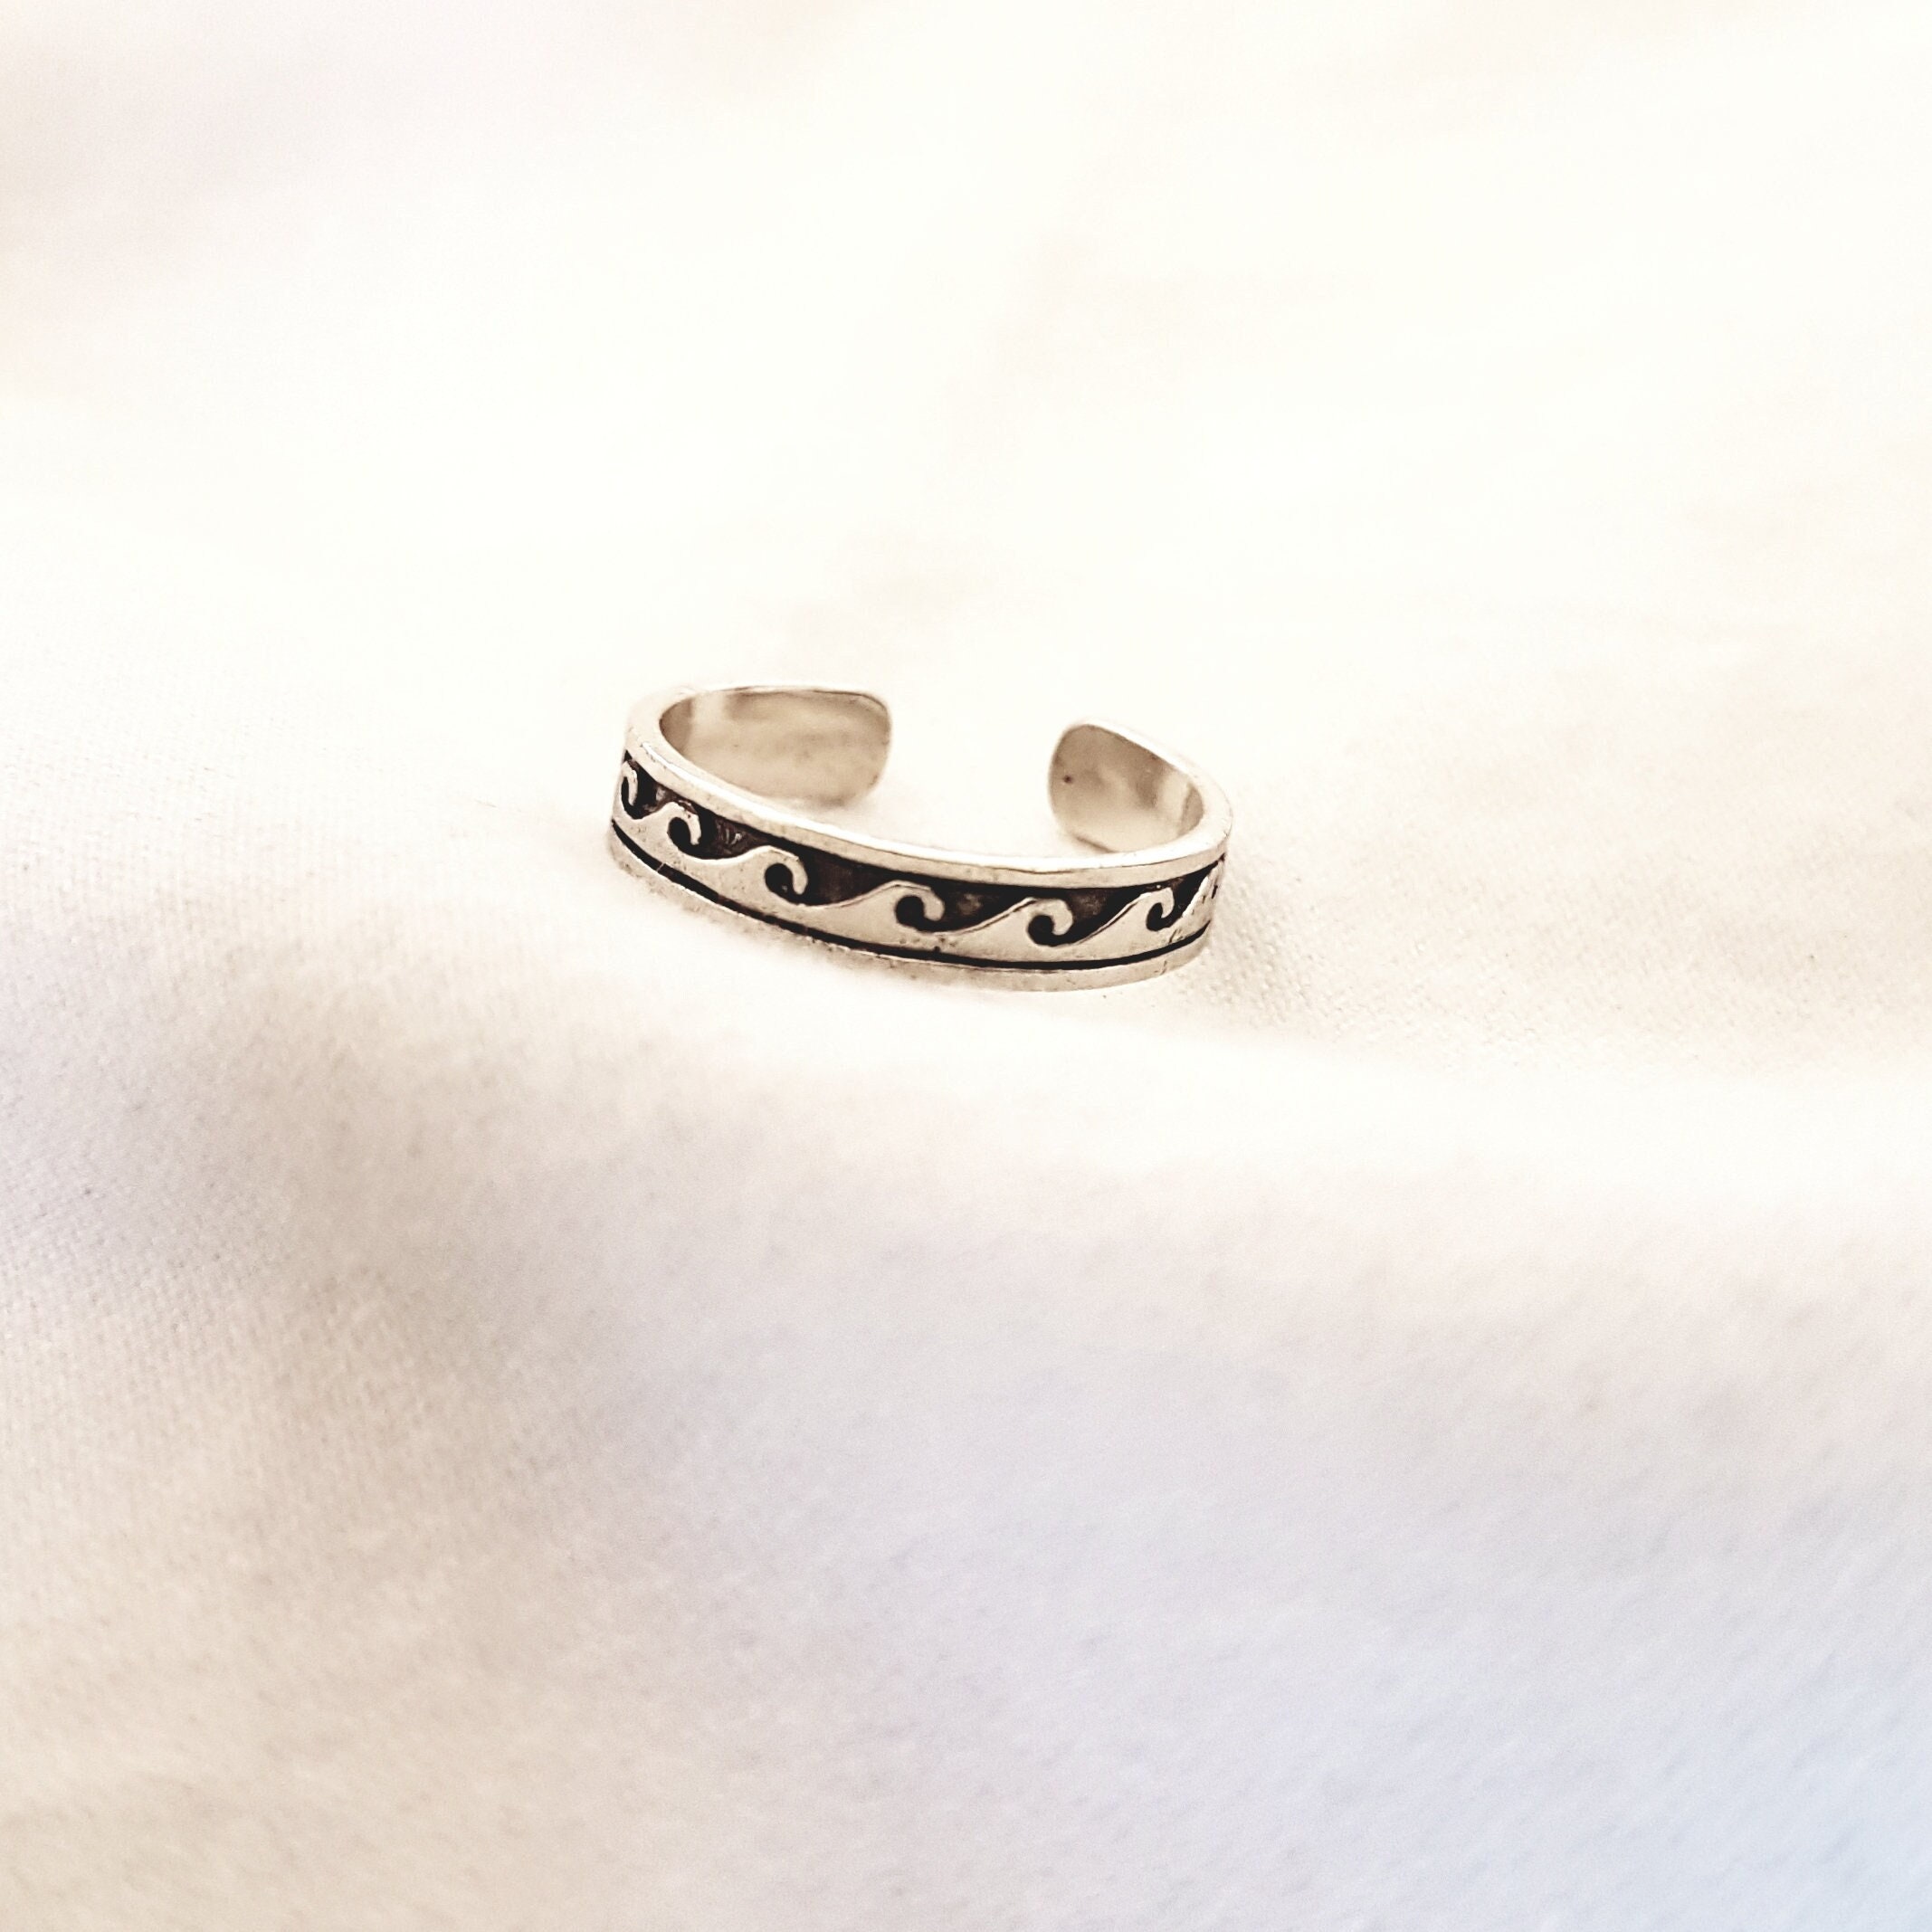 Wave Toe Ring, Sterling Silver Toe Rings, Midi Ring, Toe Rings for